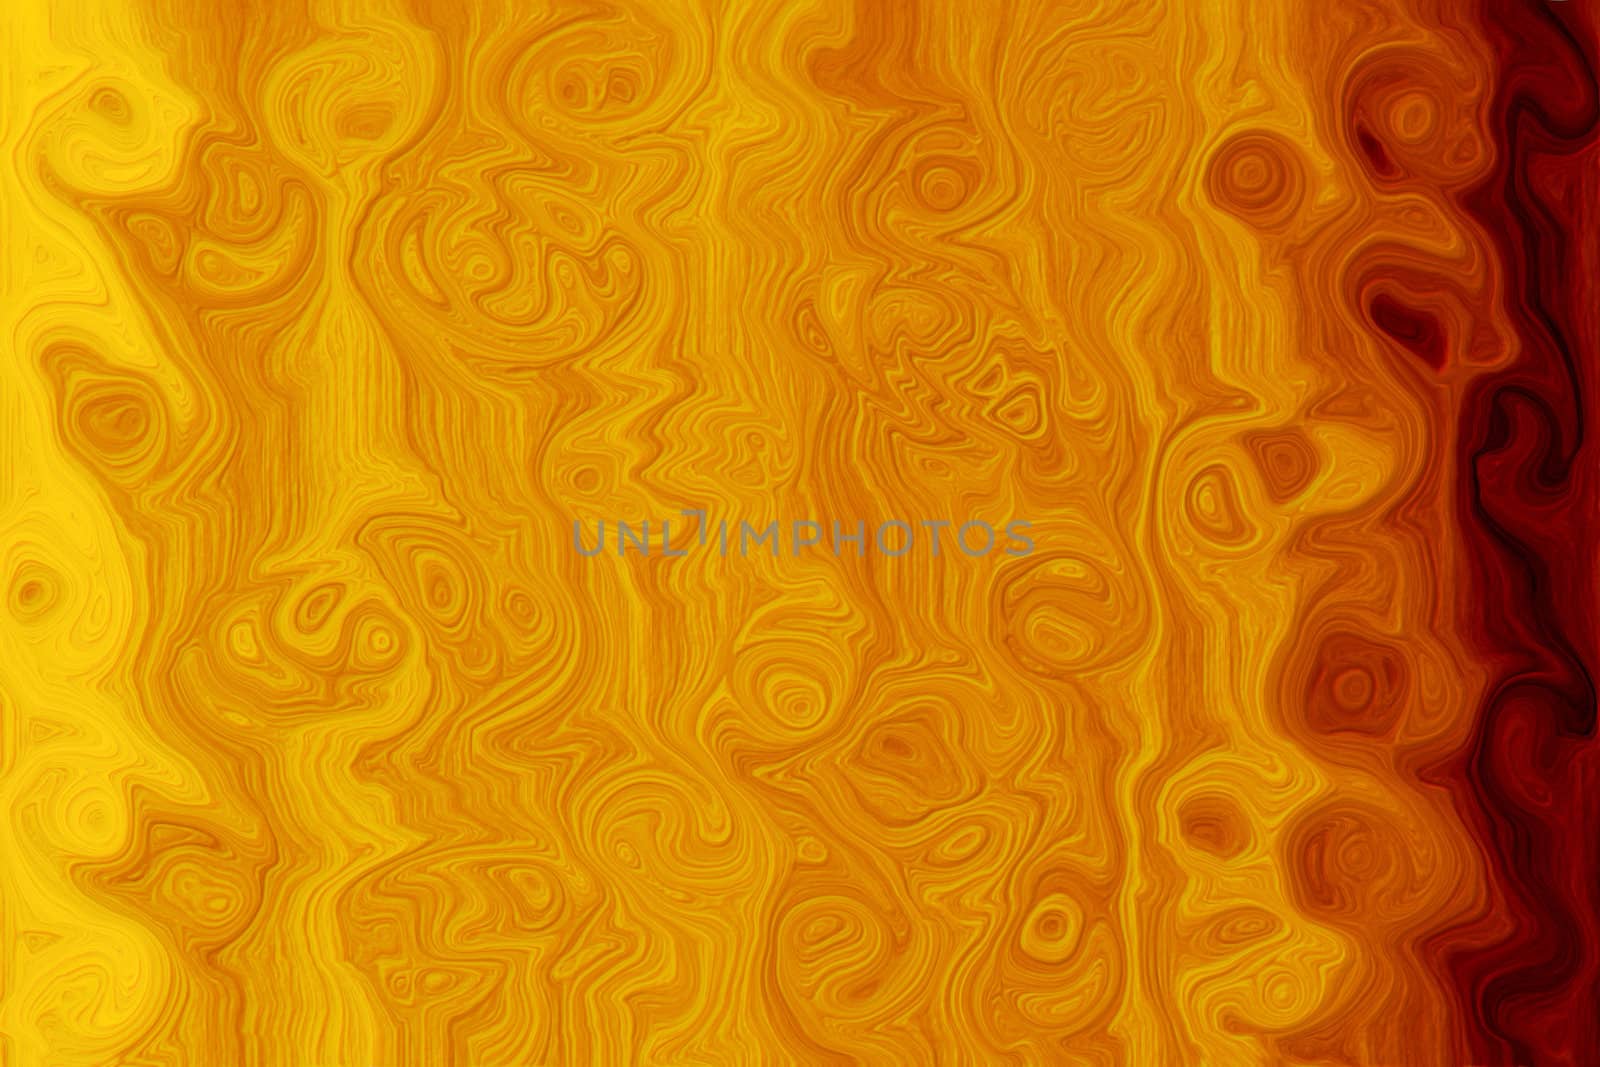 Abstract art of a wood or tree texture, which can be use as background, backdrop or design etc.